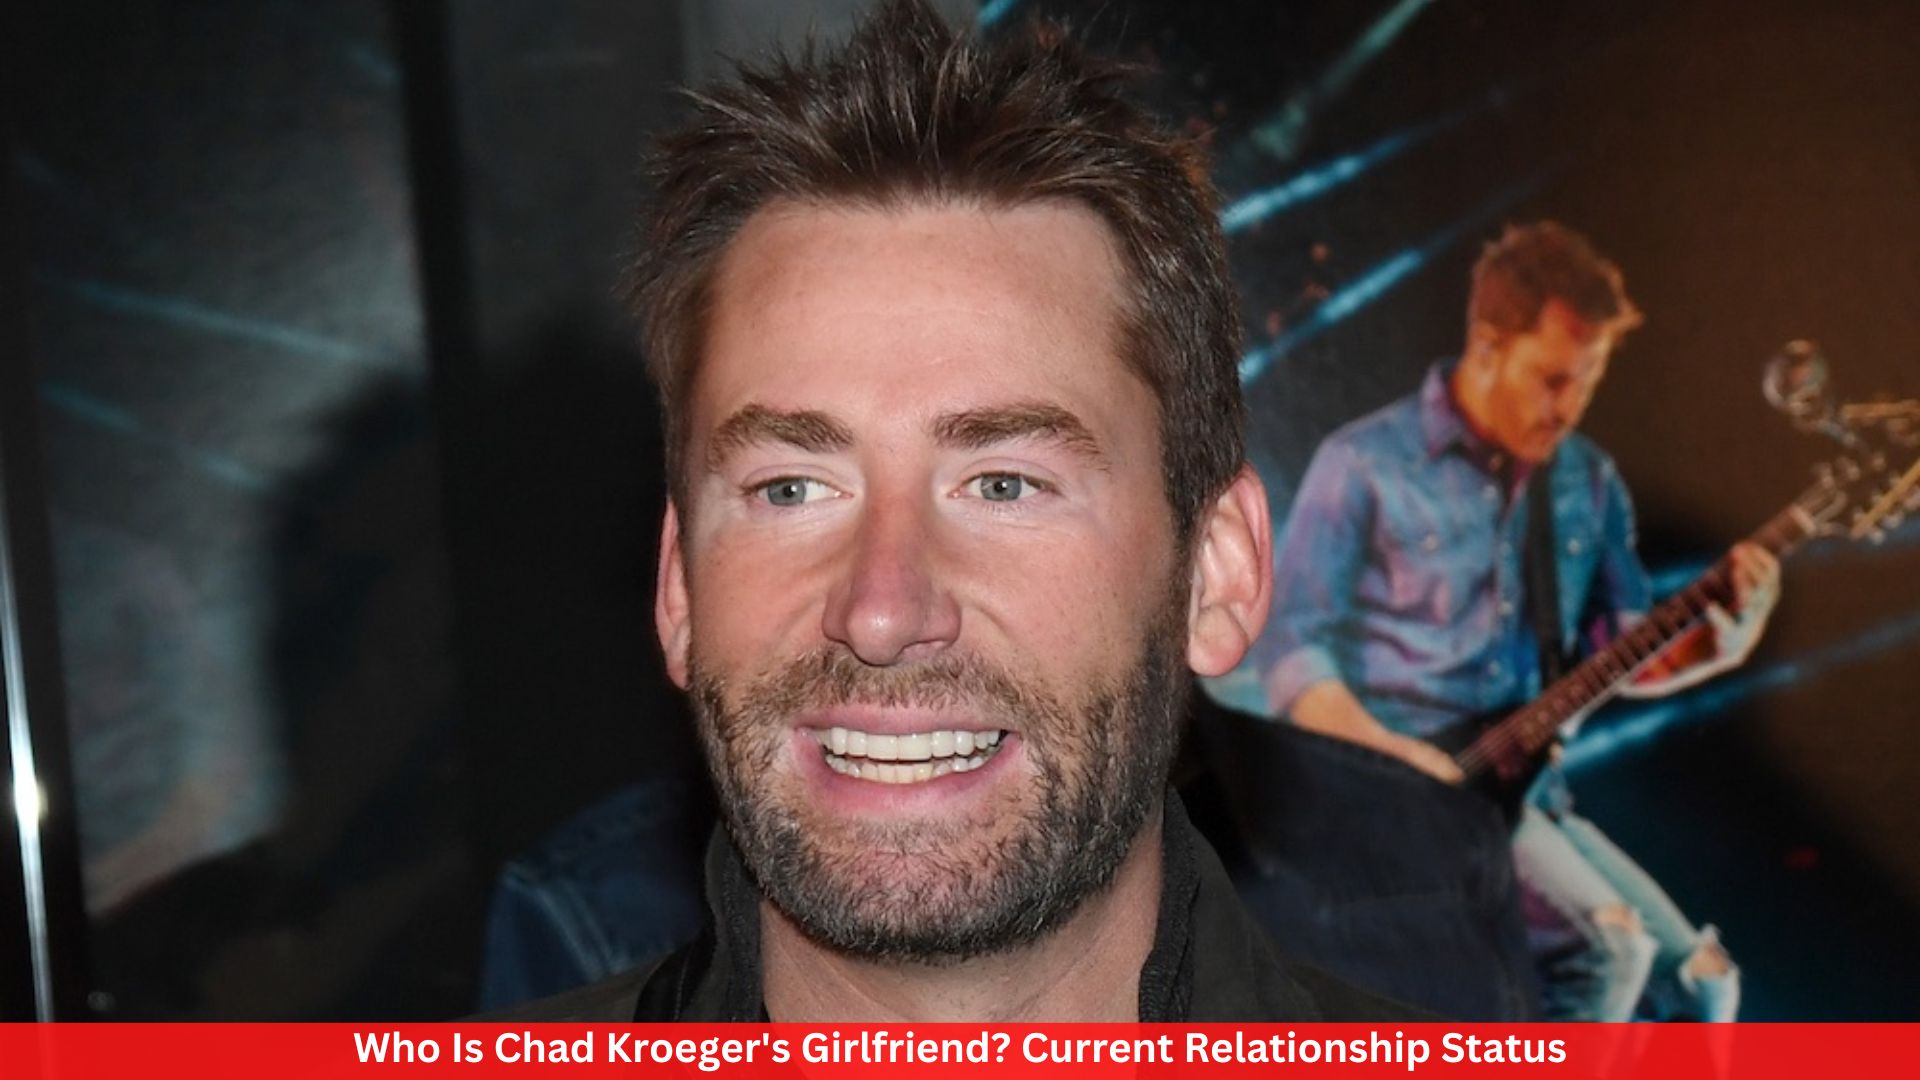 Who Is Chad Kroeger's Girlfriend? Current Relationship Status